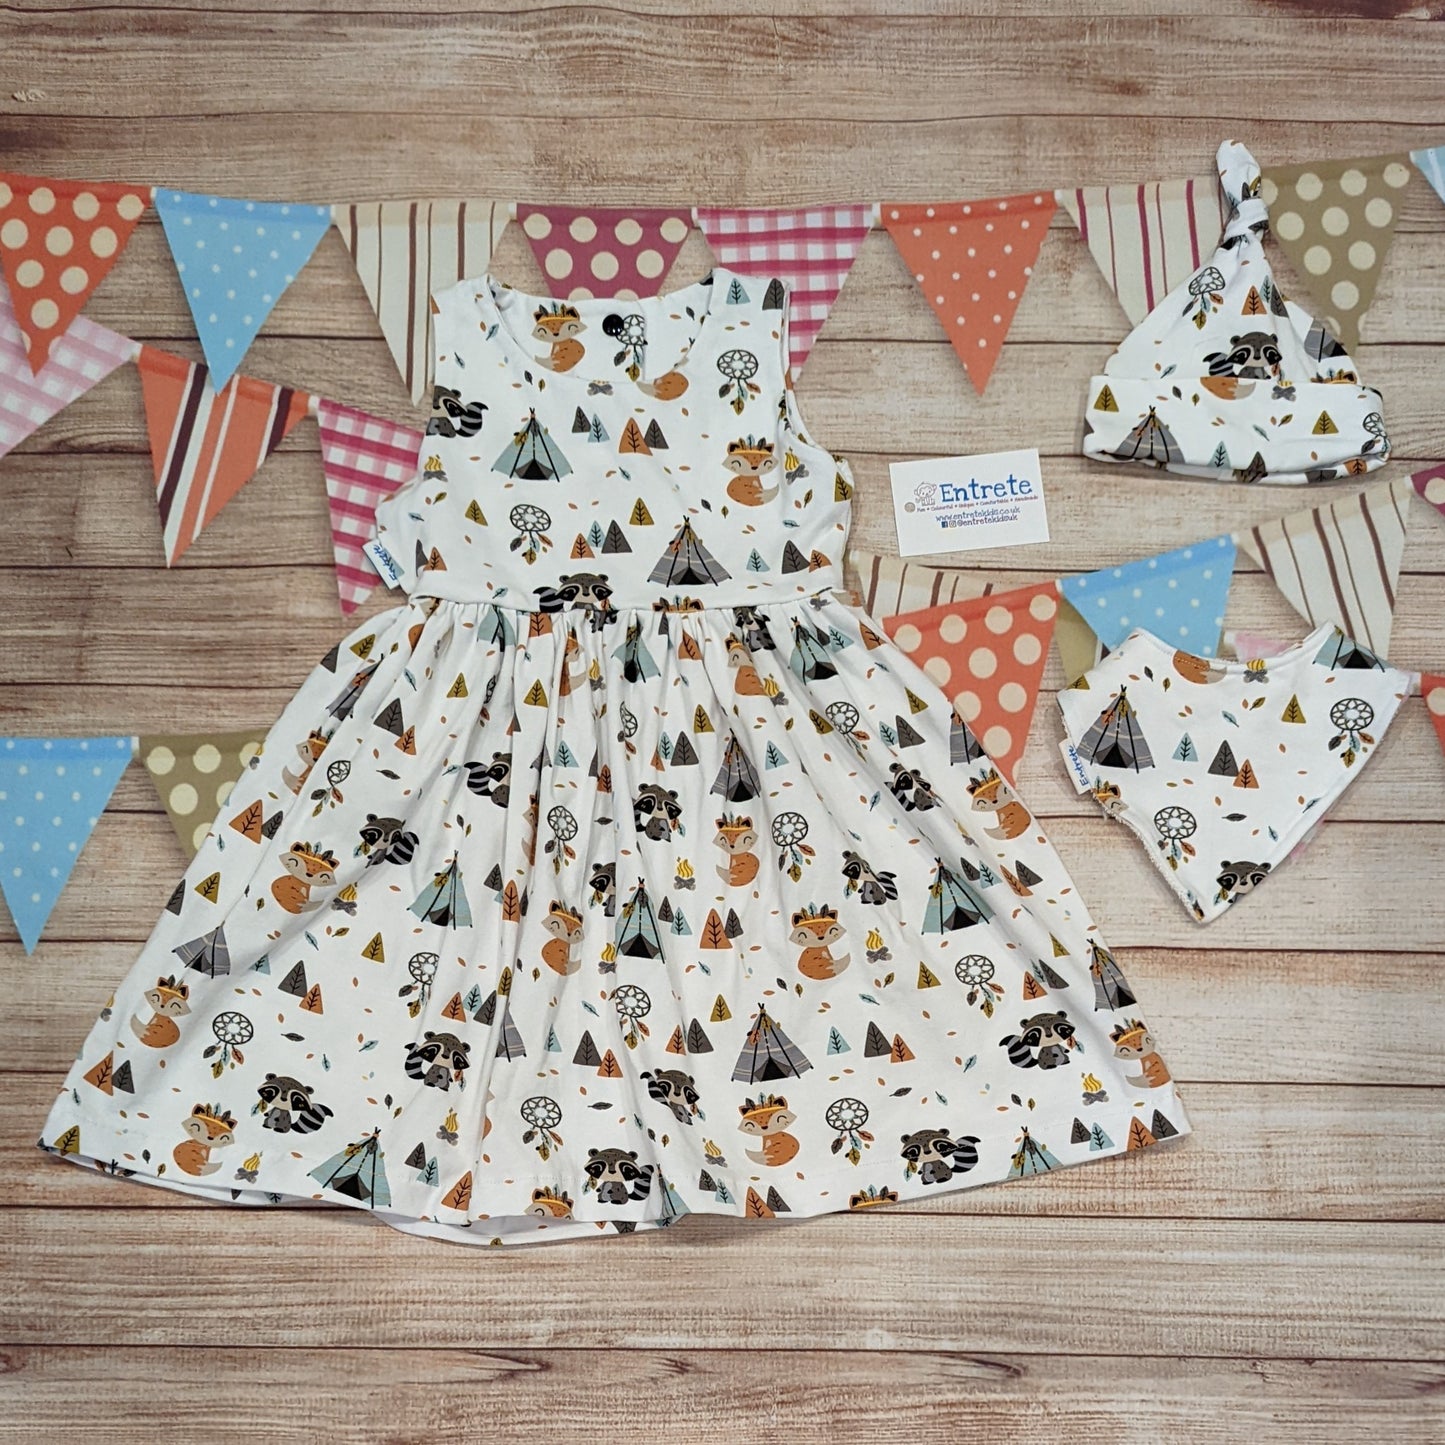 The adorable and fun fox and raccoons girls dress. Handmade using native American animals cotton jersey. Sleeveless version shown, with a matching bamboo bib and tie top hat..